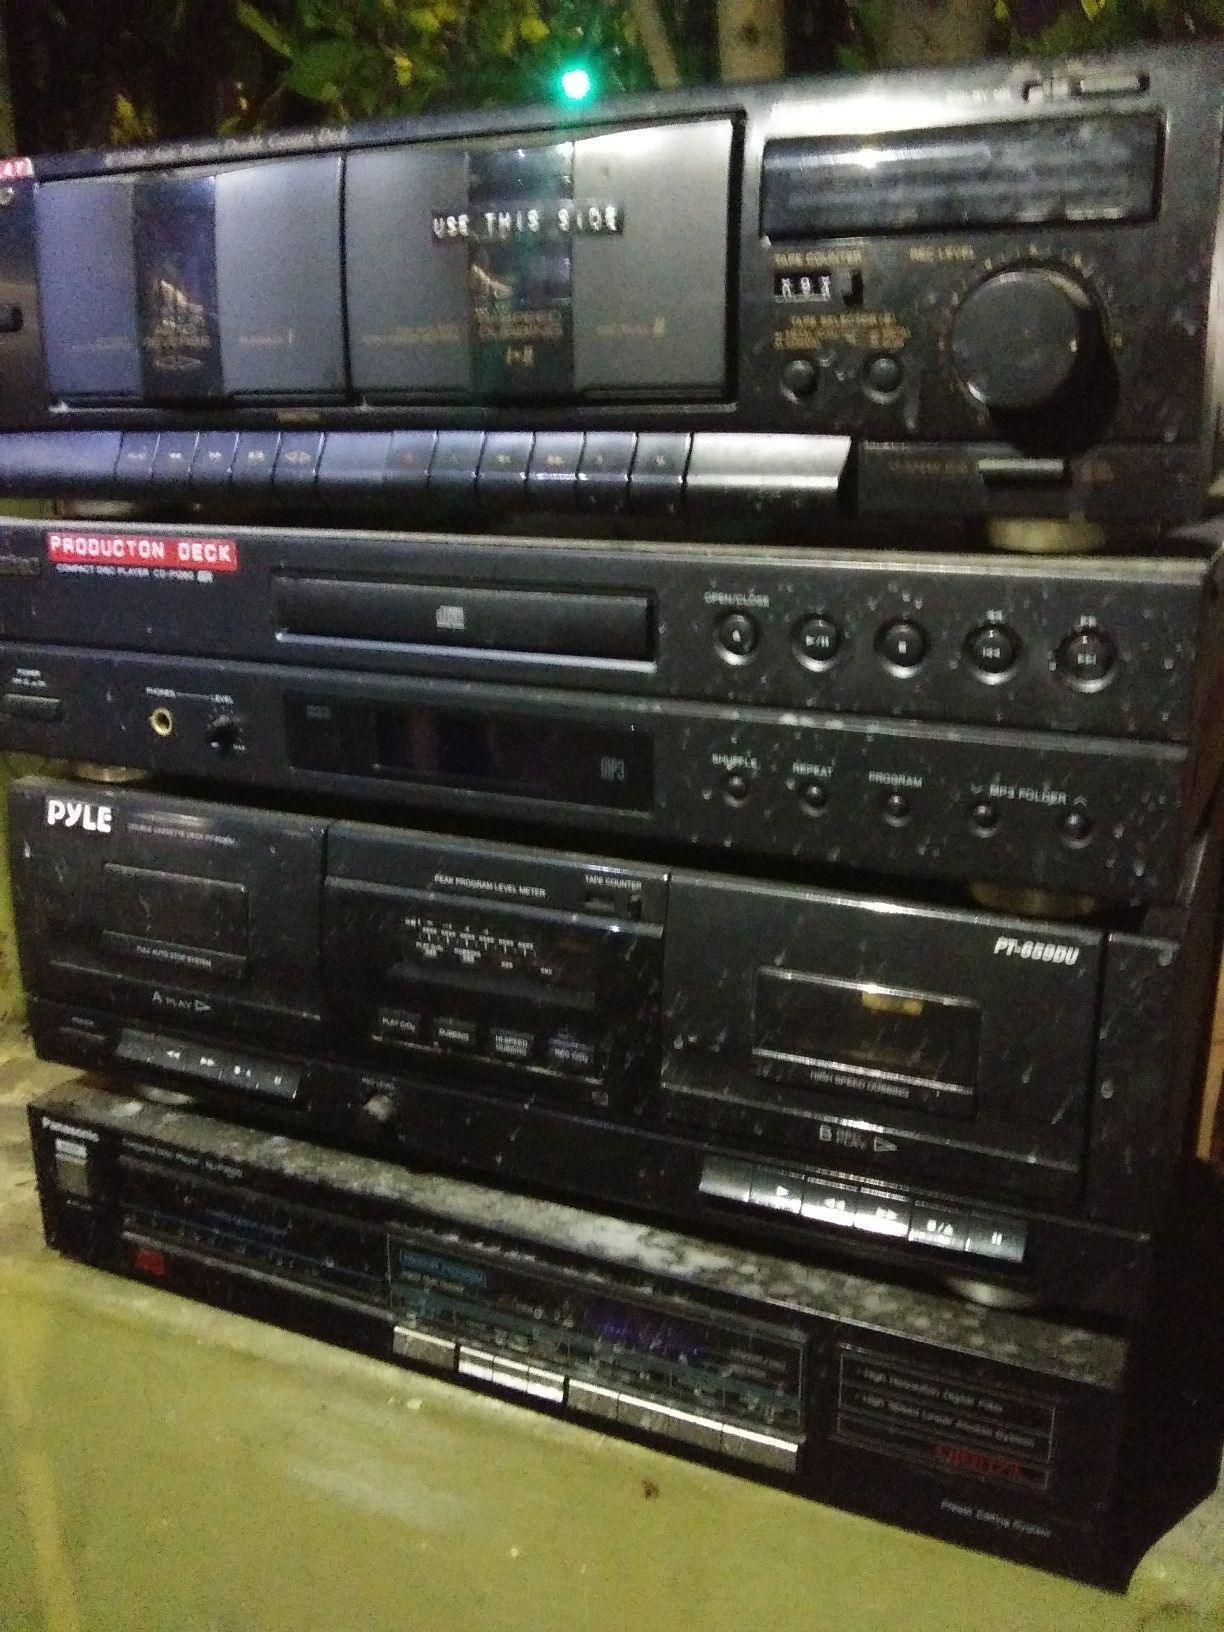 Teac, pioneer, and Sony recording equipment.